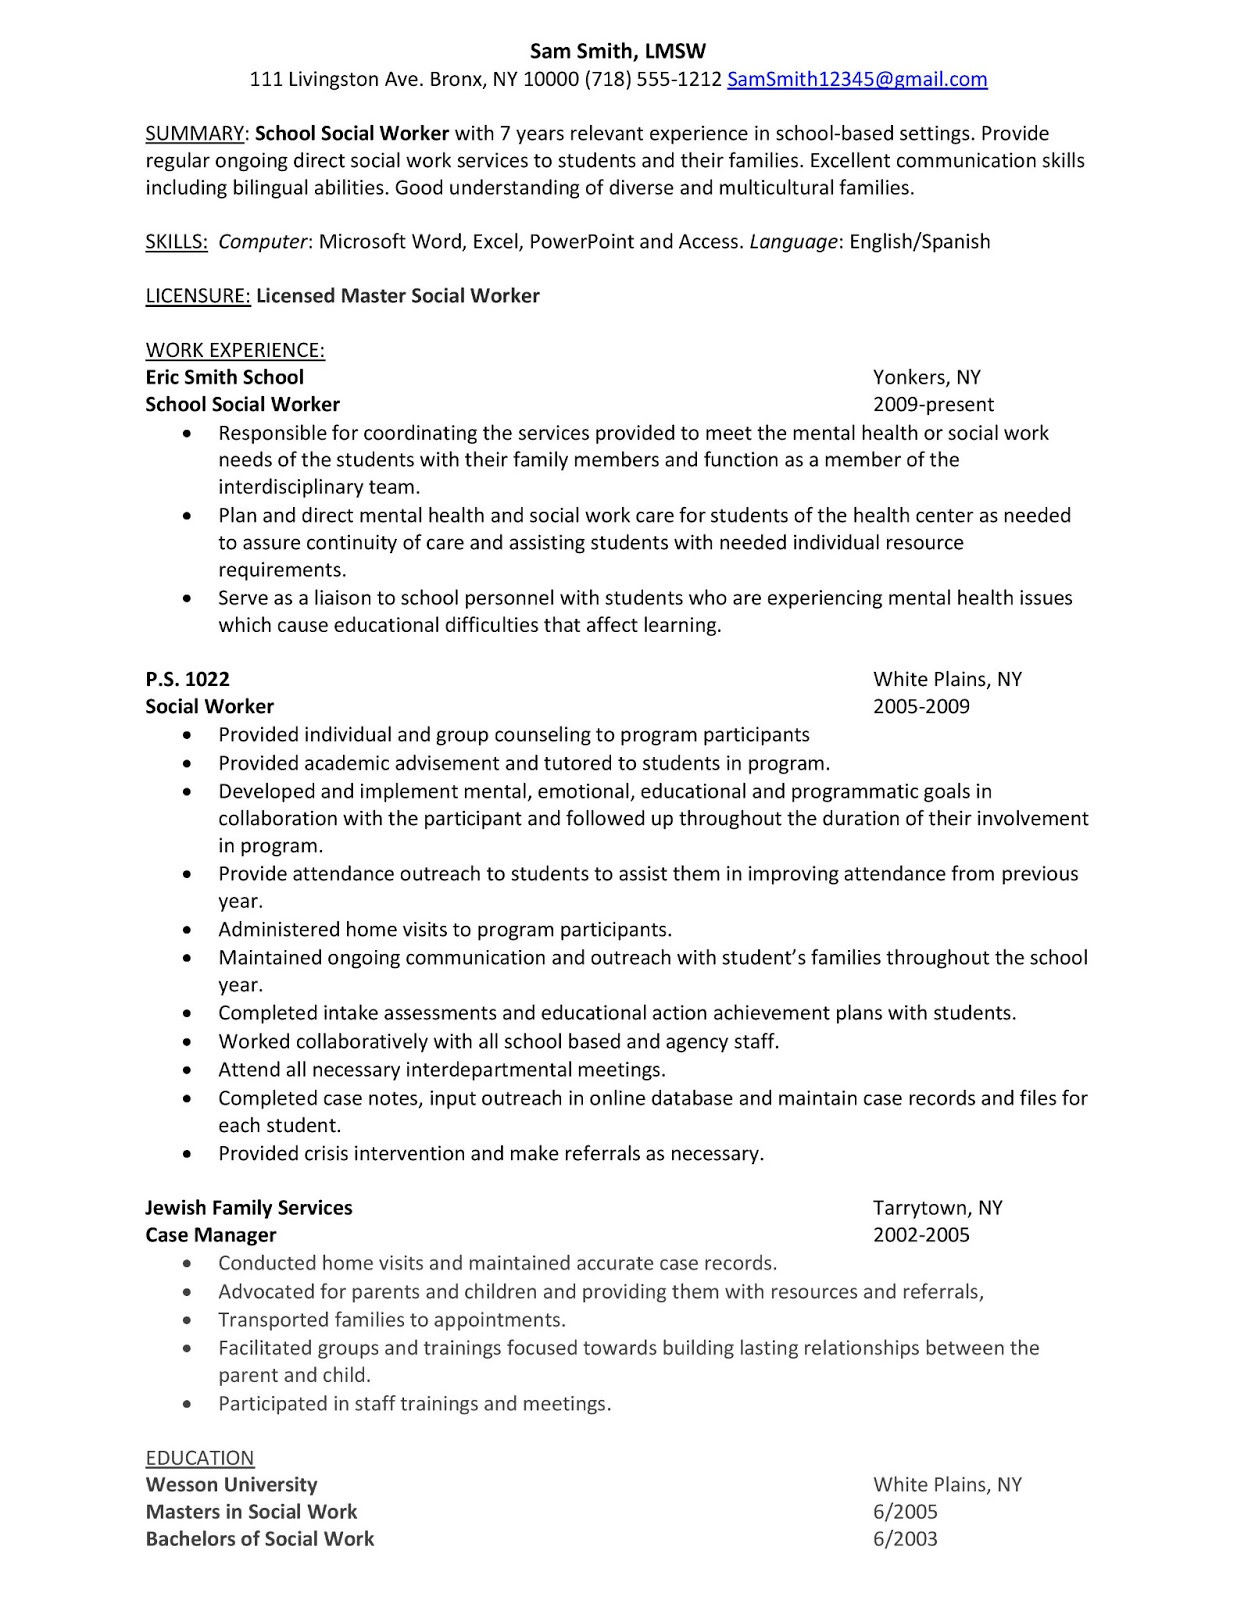 Free Sample Resume Cgild Protective Services Manager Bilingual Sample Resume: School social Worker Career Advice & Pro …